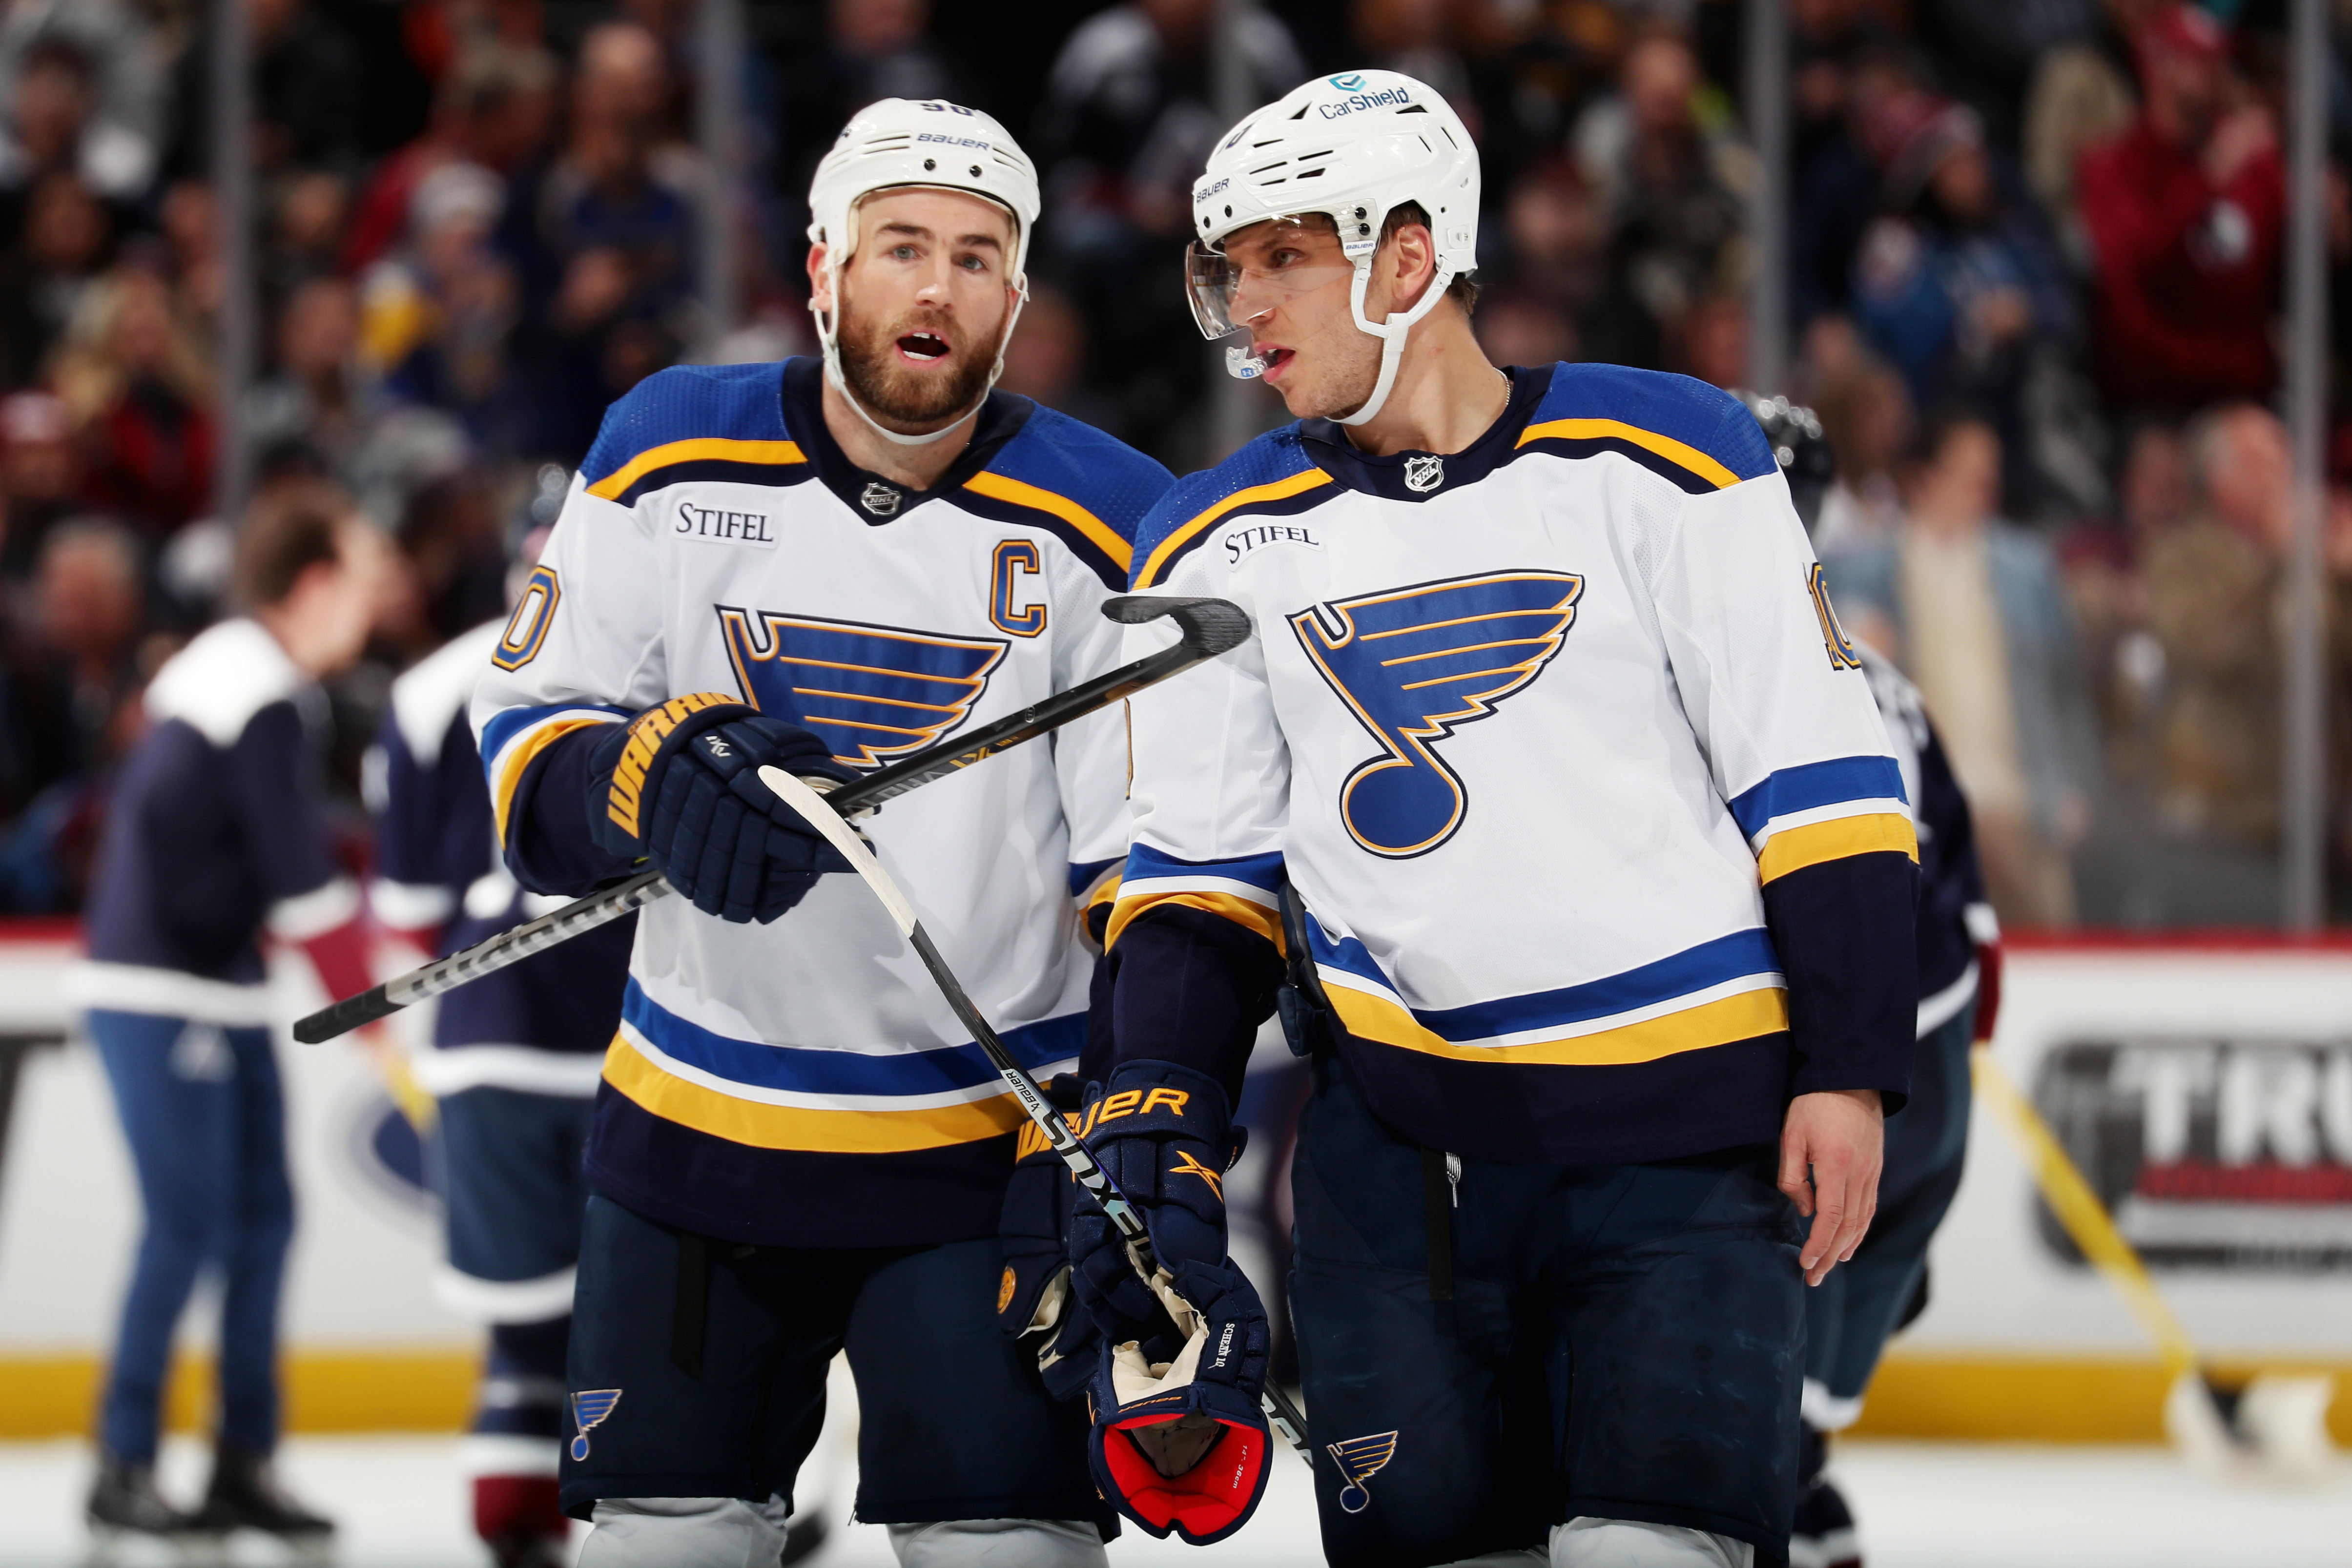 Ryan O’Reilly and Brayden Schenn of the St. Louis Blues converse during a pause in play against the Colorado Avalanche at Ball Arena on November 14, 2022 in Denver, Colorado.